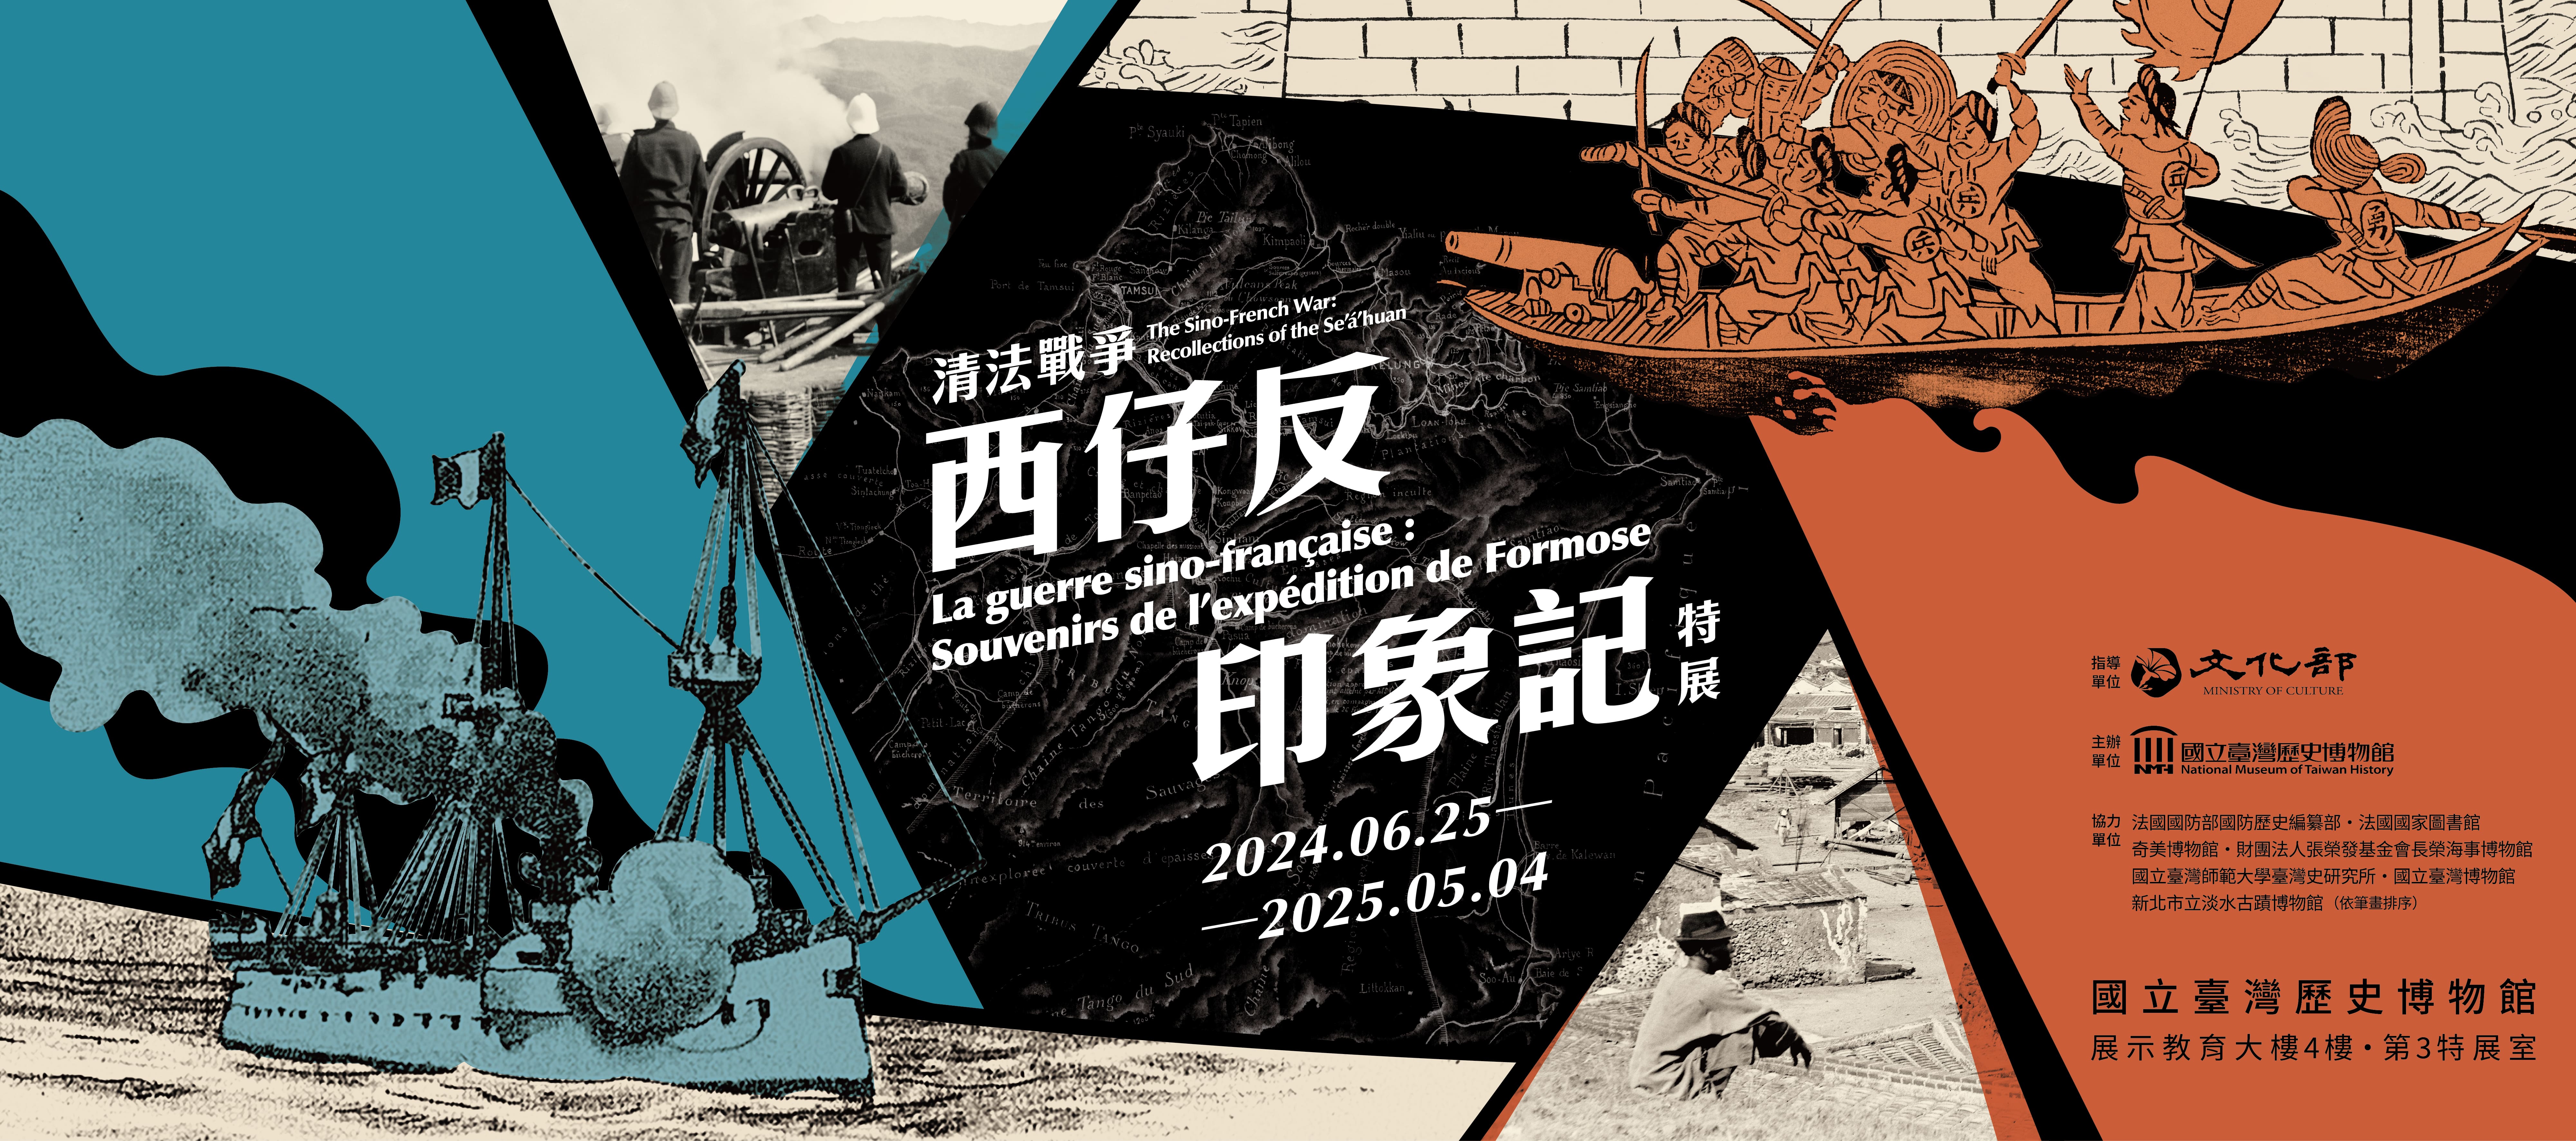 NMTH kicks off exhibition on Sino-French War in Taiwan